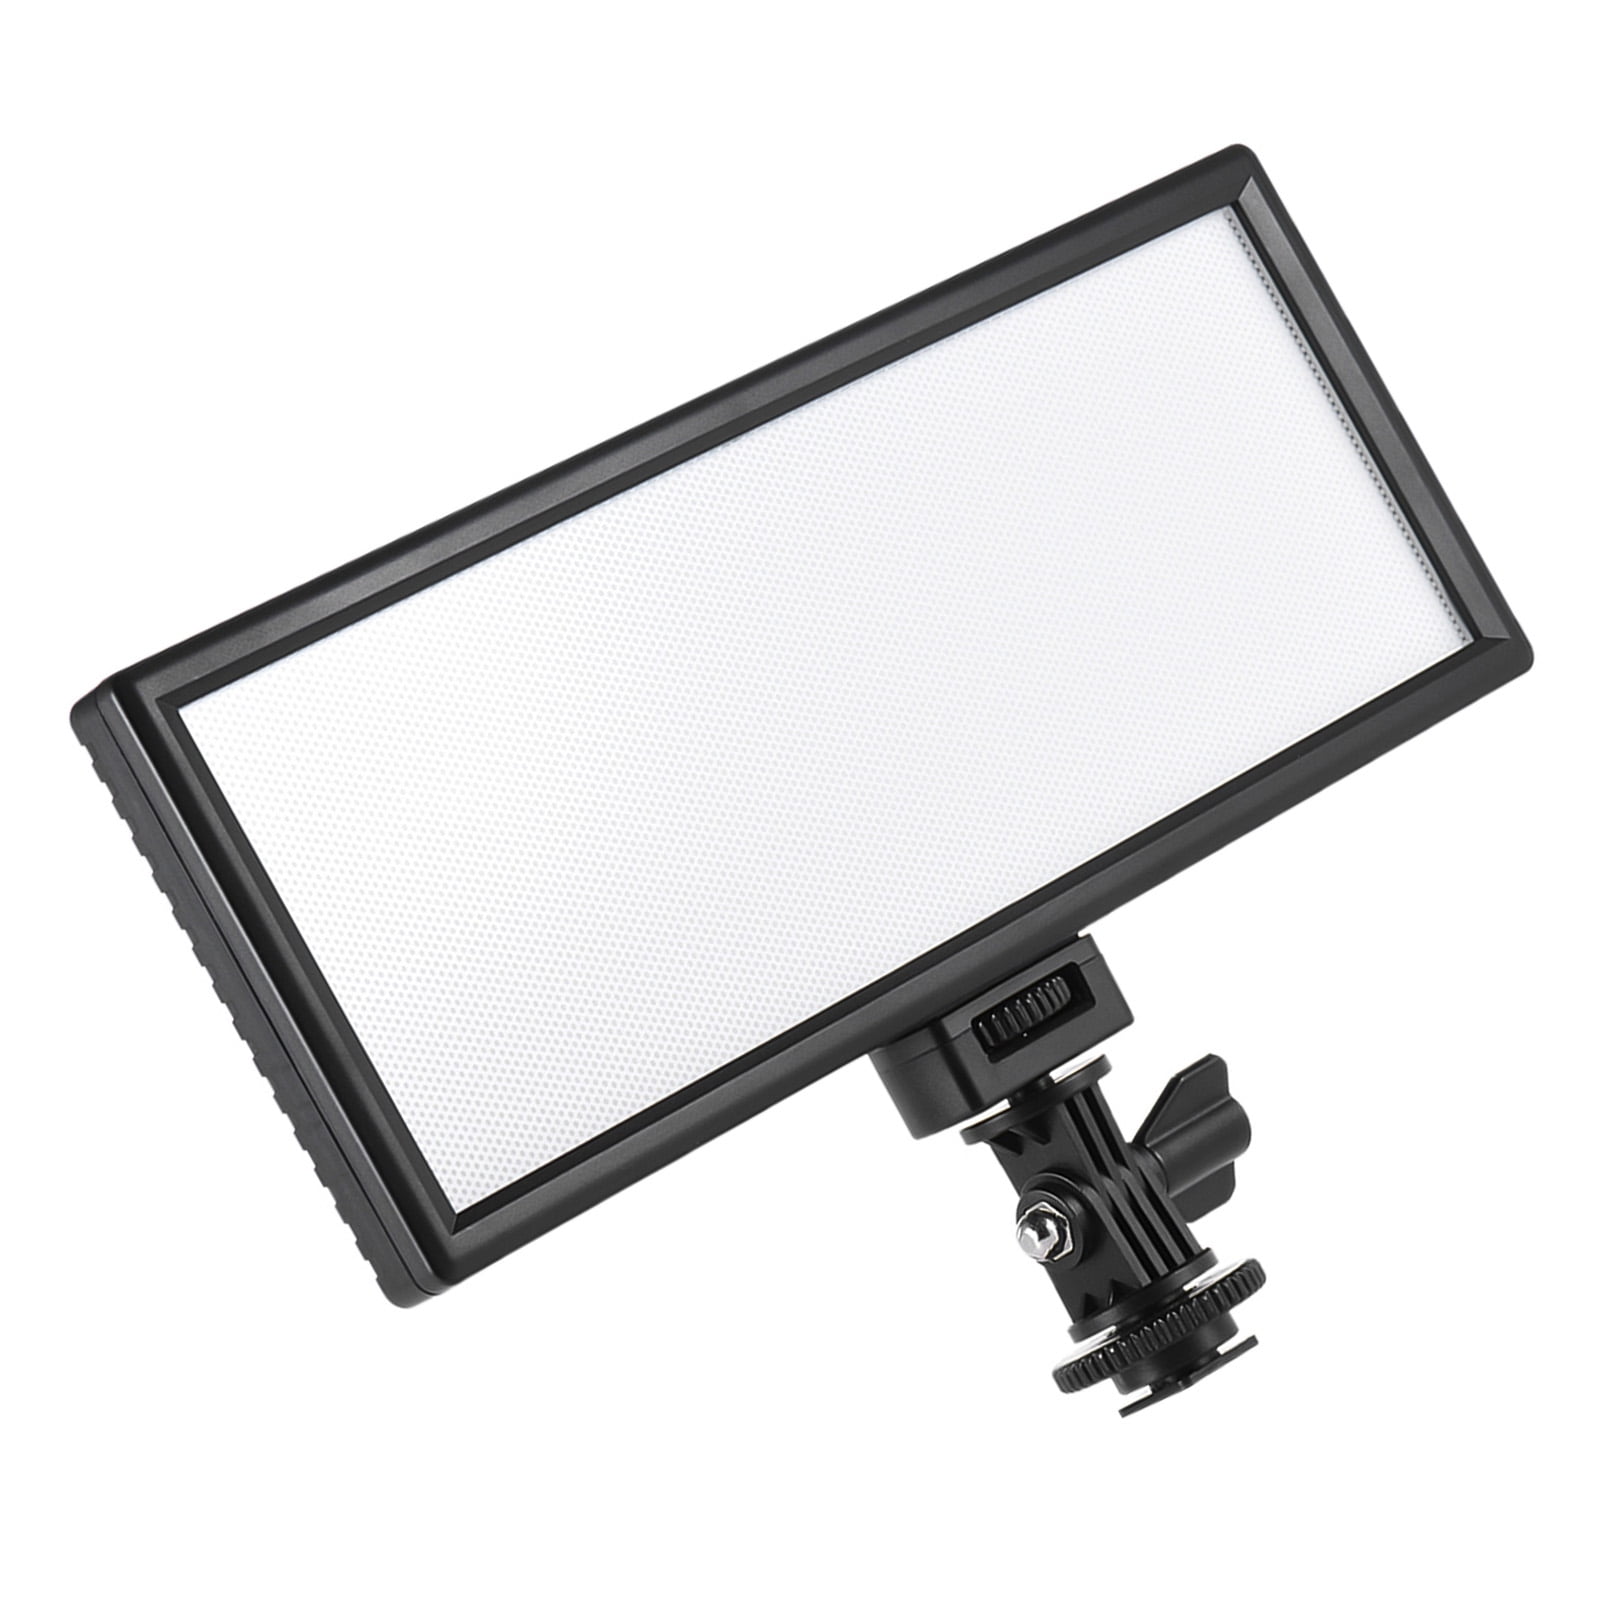 Viltrox L132T Ultra-Thin On-Camera LED Video Panel Light Dimmable Flat Panel Light Adjustable 3300K-5600K with Andoer Cleaning Cloth for Canon Nikon Sony Panasonic DSLR 